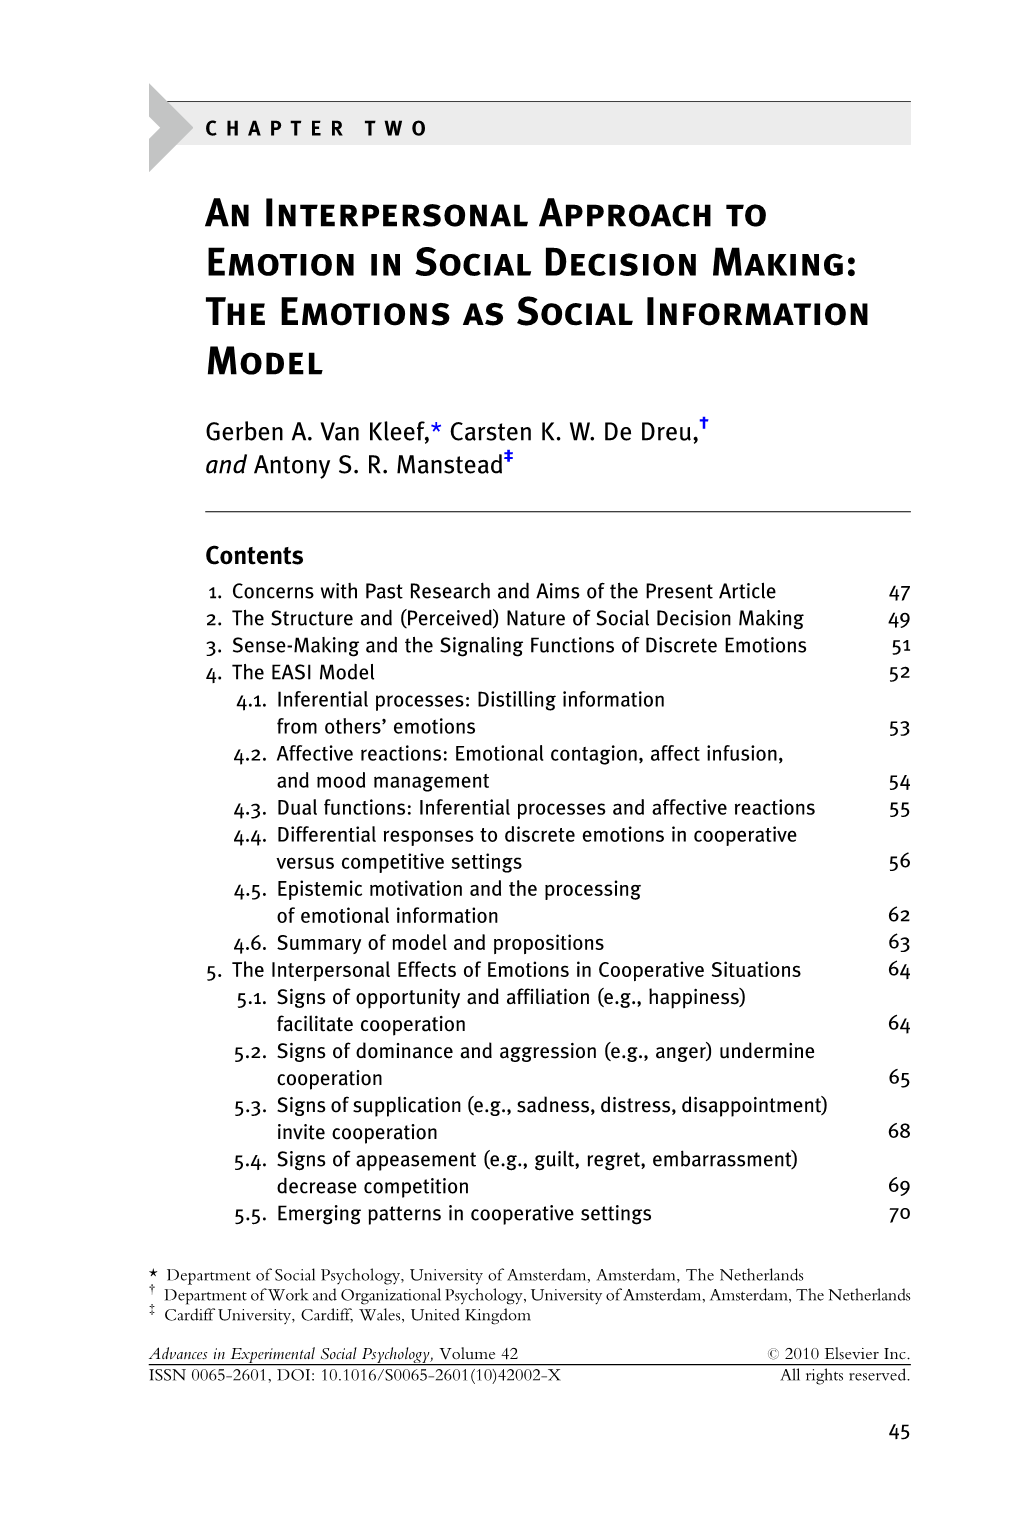 An Interpersonal Approach to Emotion in Social Decision Making: the Emotions As Social Information Model